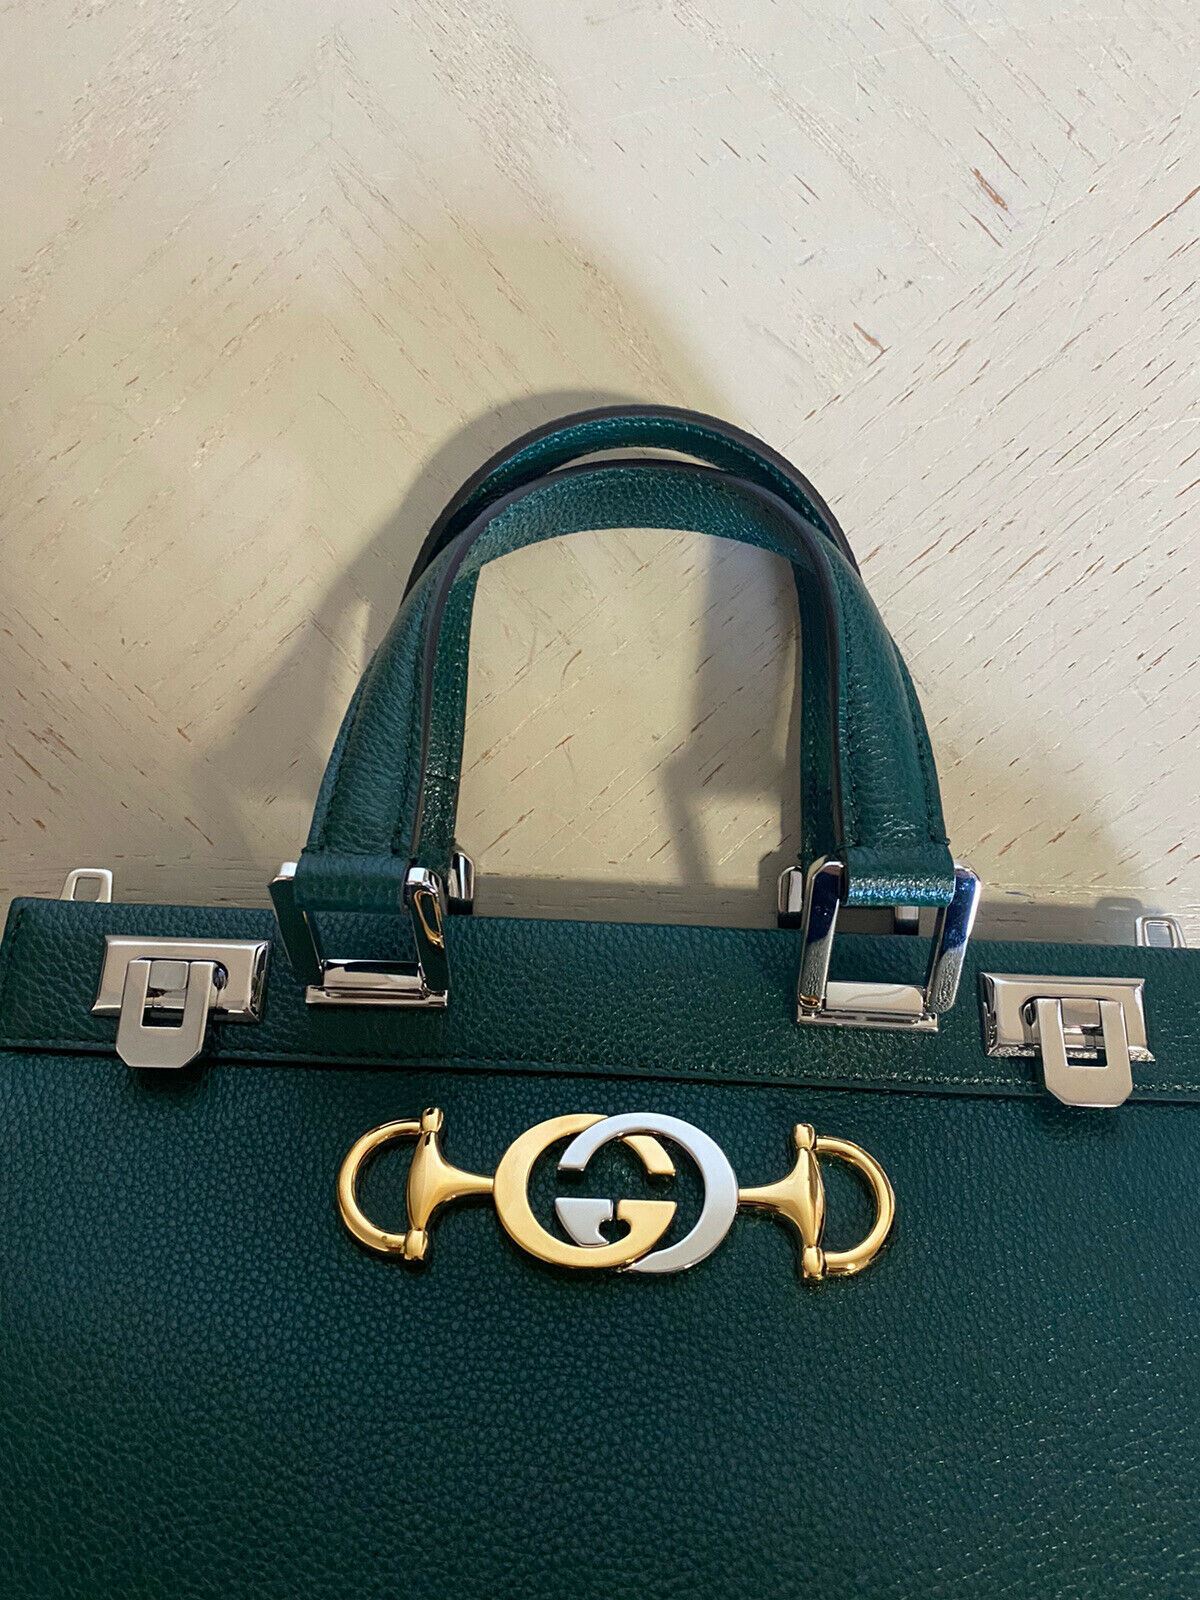 New $3400 Gucci Small Leather Zumi Top Handle Tote Bag Green 569712